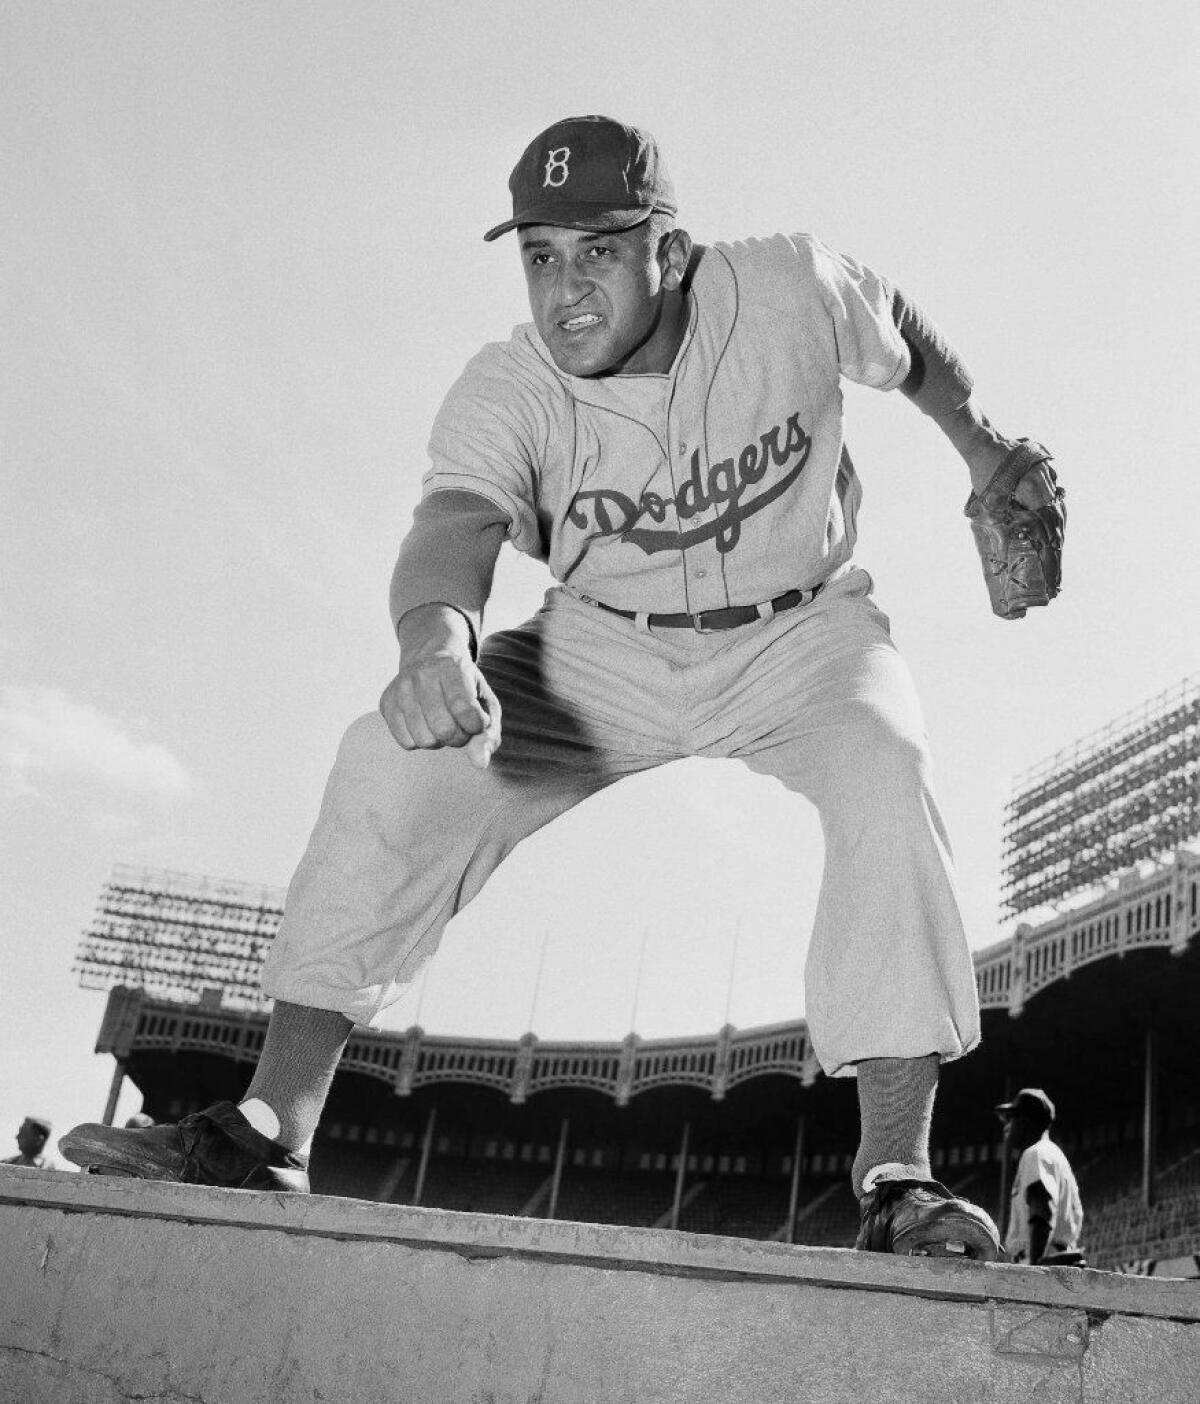 The Brooklyn Dodgers' Don Newcombe, shown on Sept. 28, 1955, poses against the backdrop of Yankee Stadium.